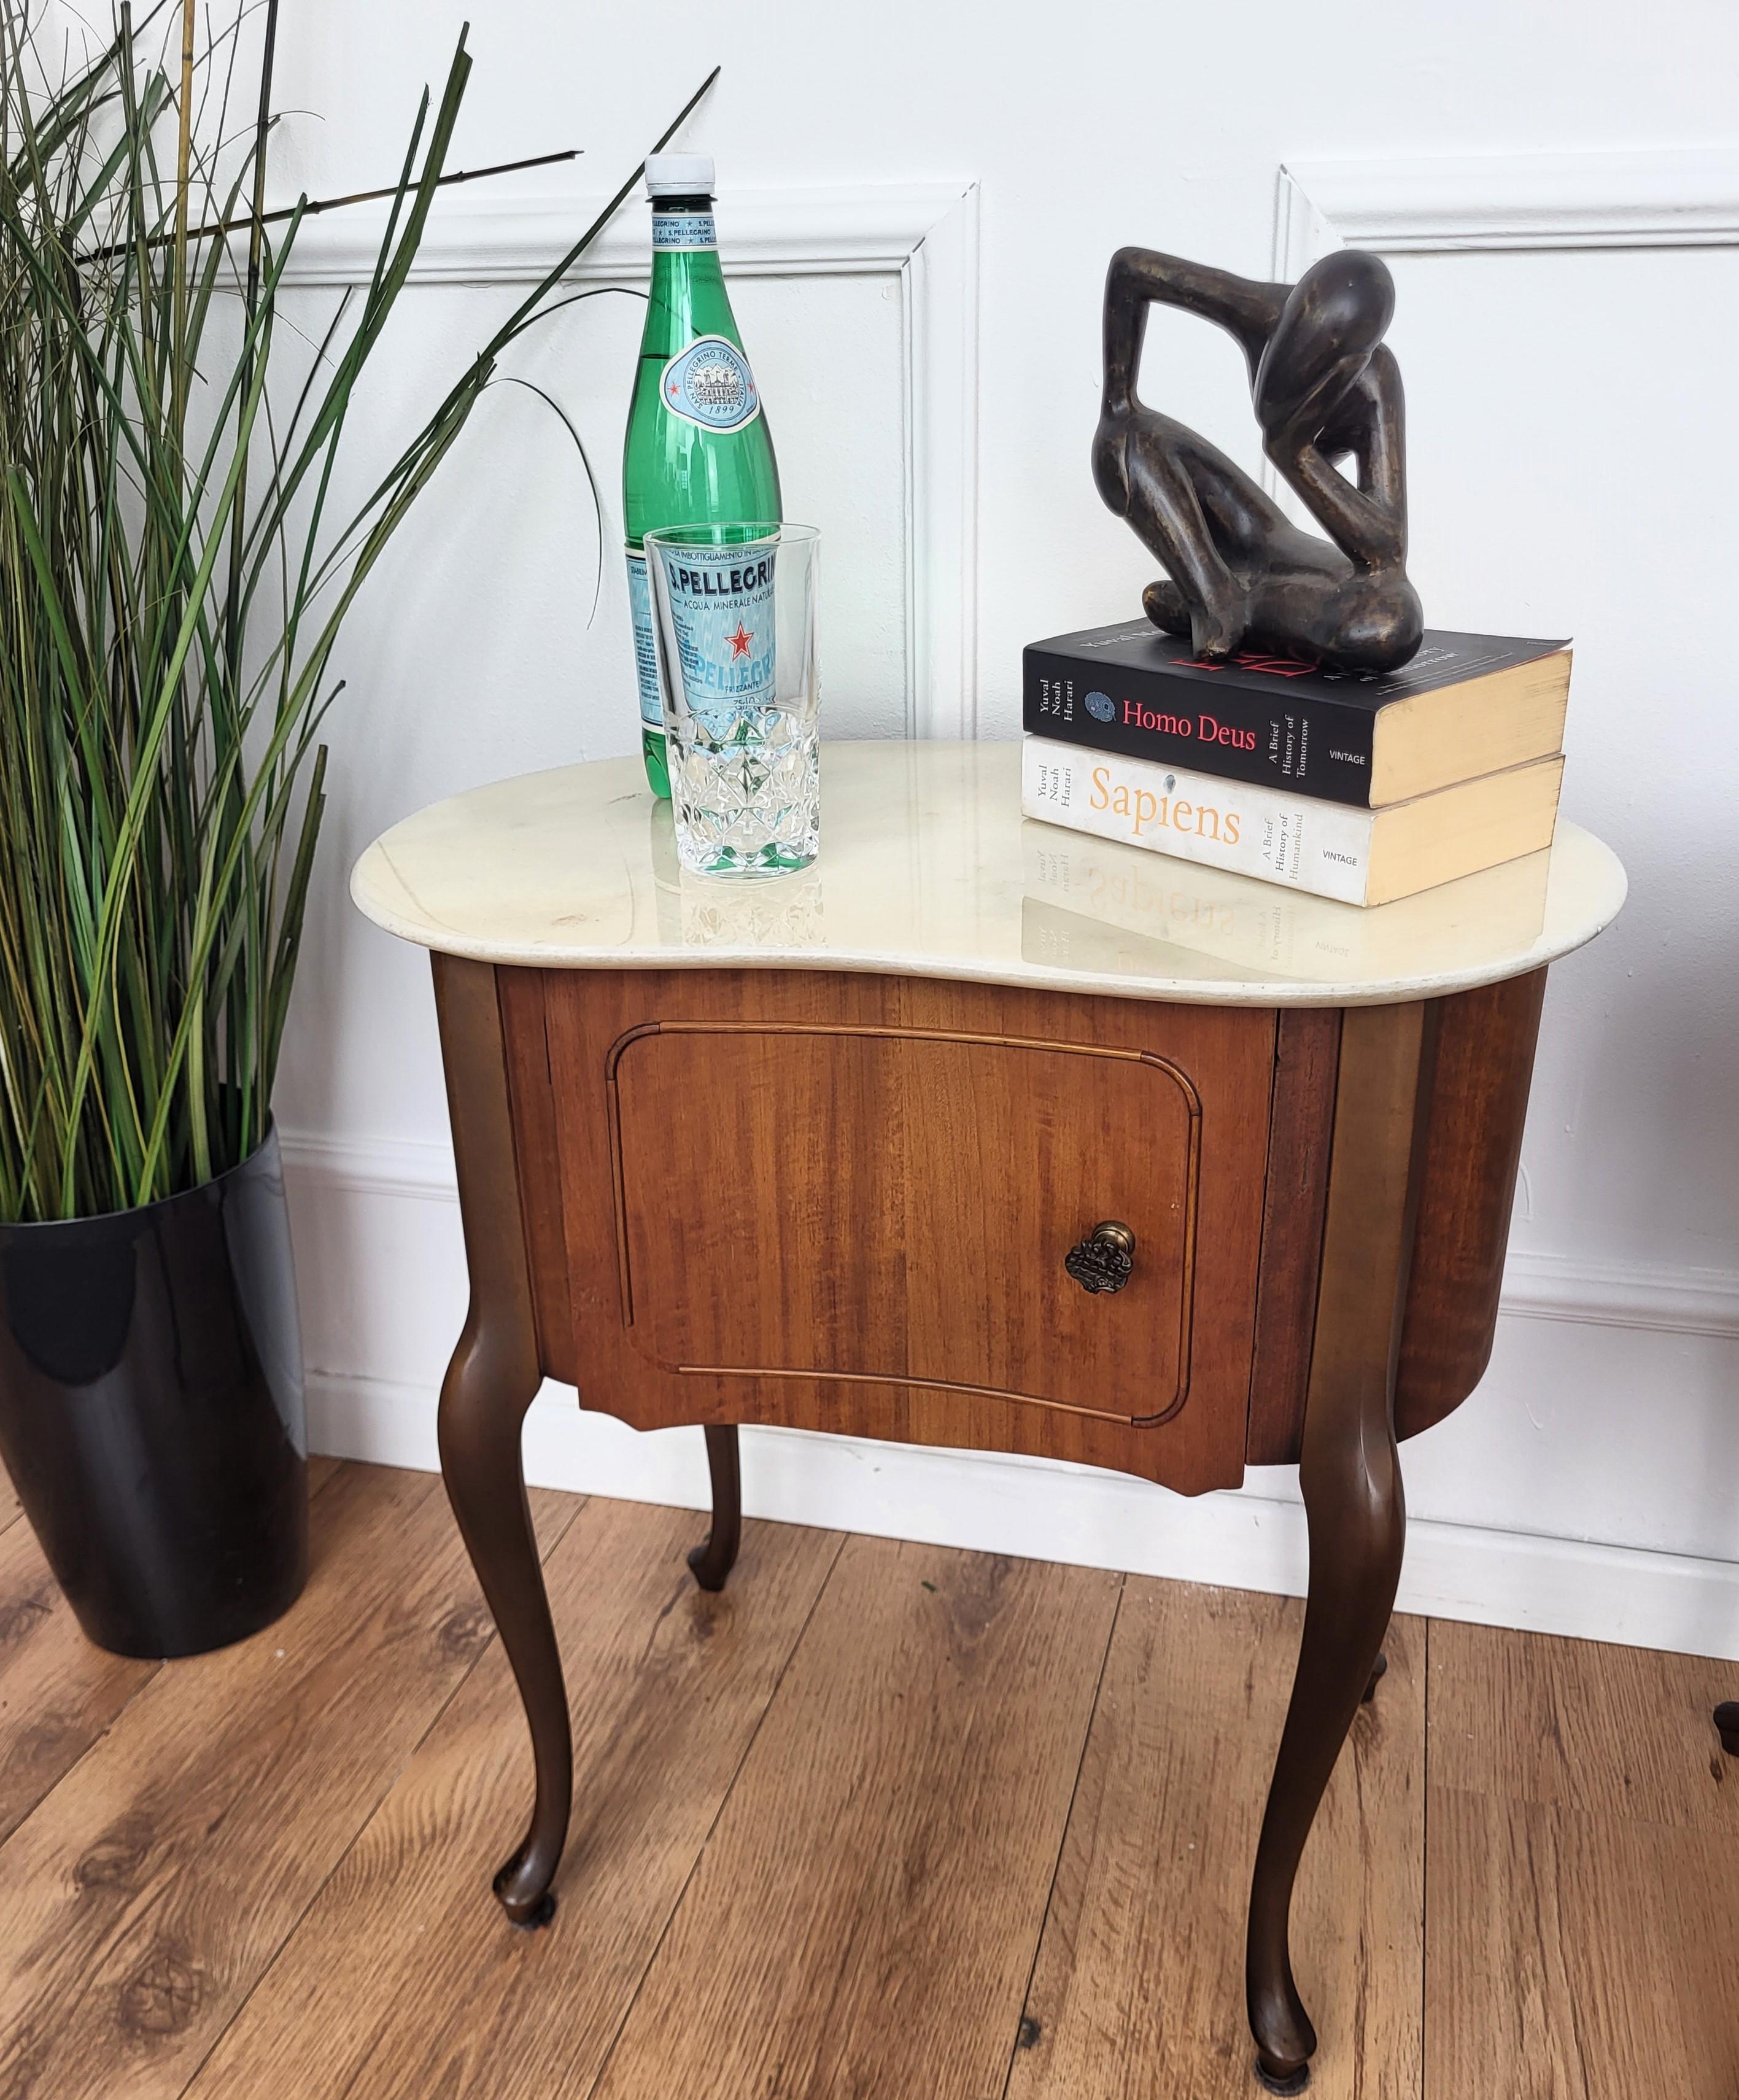 Very elegant and refined Italian Art Deco design, pair of bedside tables in kidney design shape with wood front door, white marble top standing on four saber legs. 

Those pieces make a great look in any style bedroom, as a complementary design or